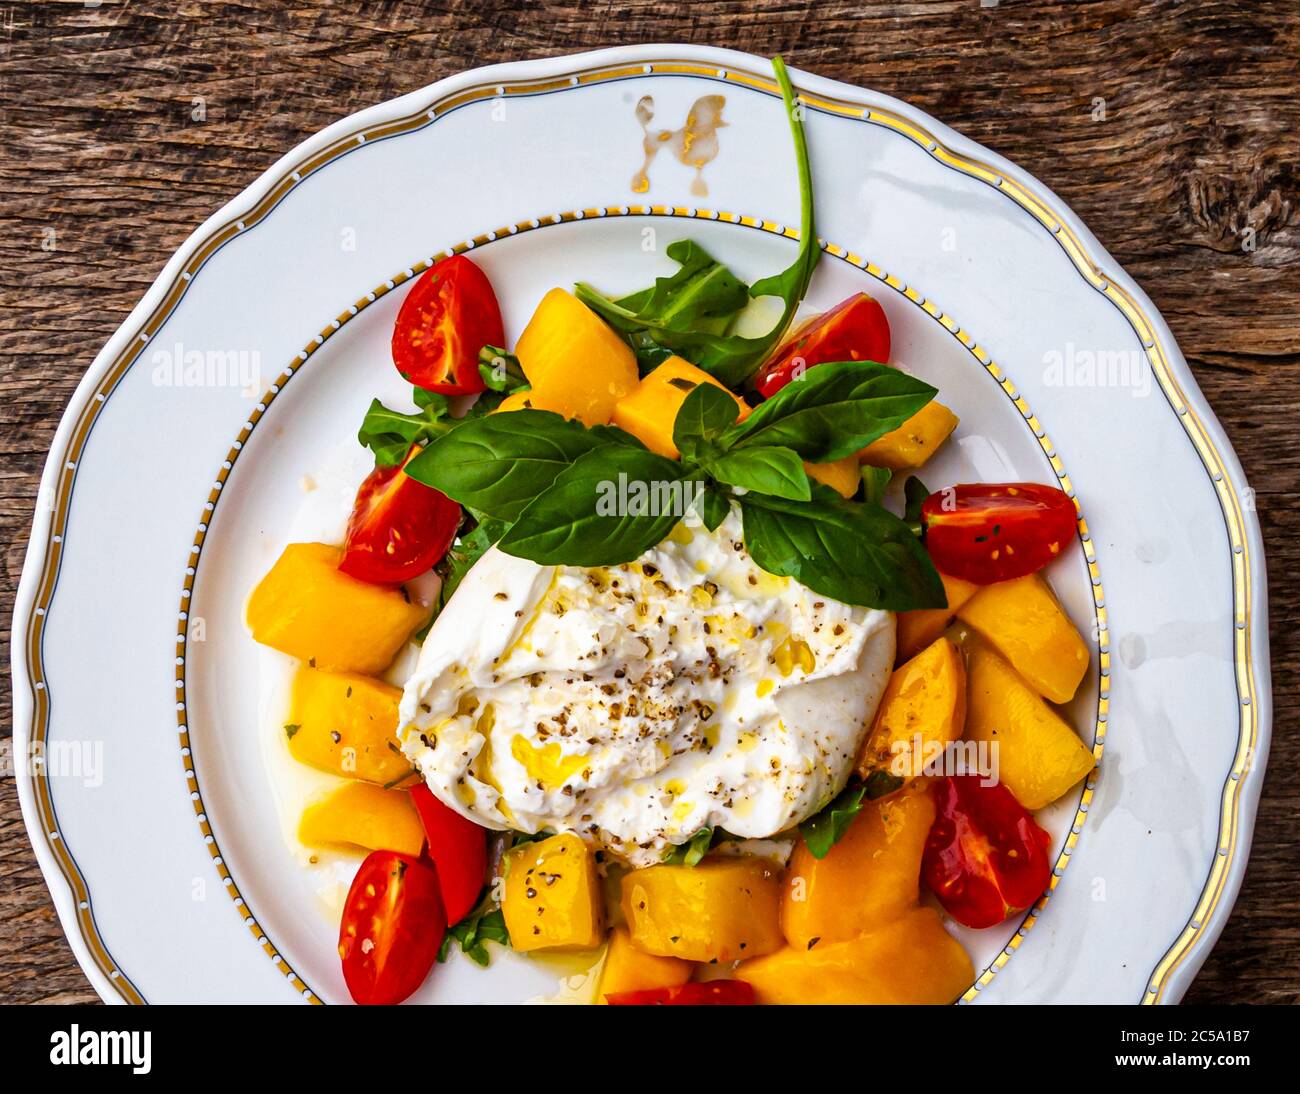 Poodle with a gold rim on the restaurant tableware. Bright yellow in the middle, a wonderful summer dish: burrata with mango and mint salad. Effectively seasoned with olive oil, crunchy sea salt and white pepper Stock Photo